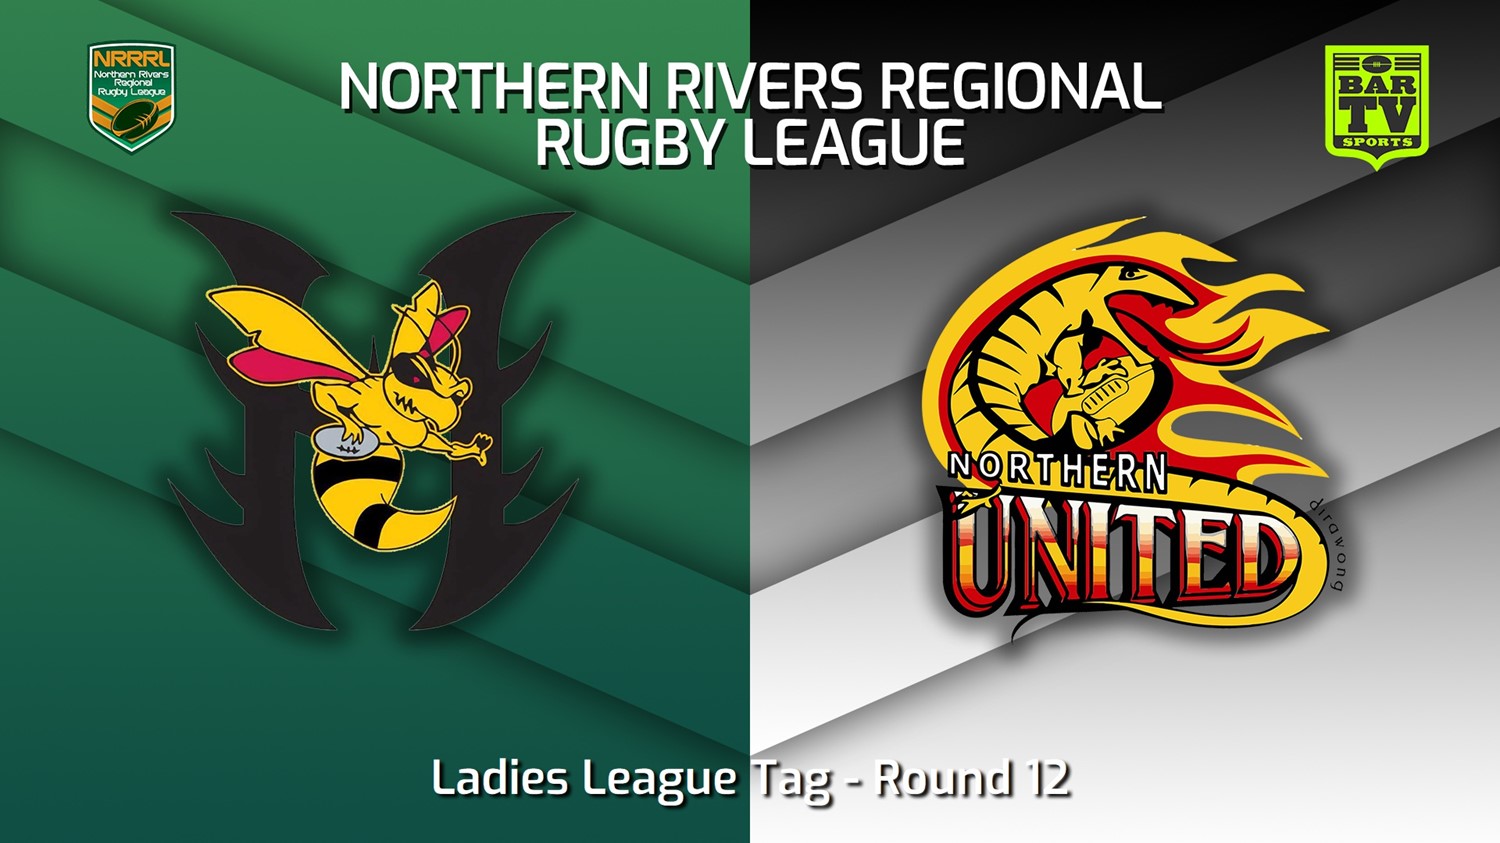 220717-Northern Rivers Round 12 - Ladies League Tag - Cudgen Hornets v Northern United Slate Image